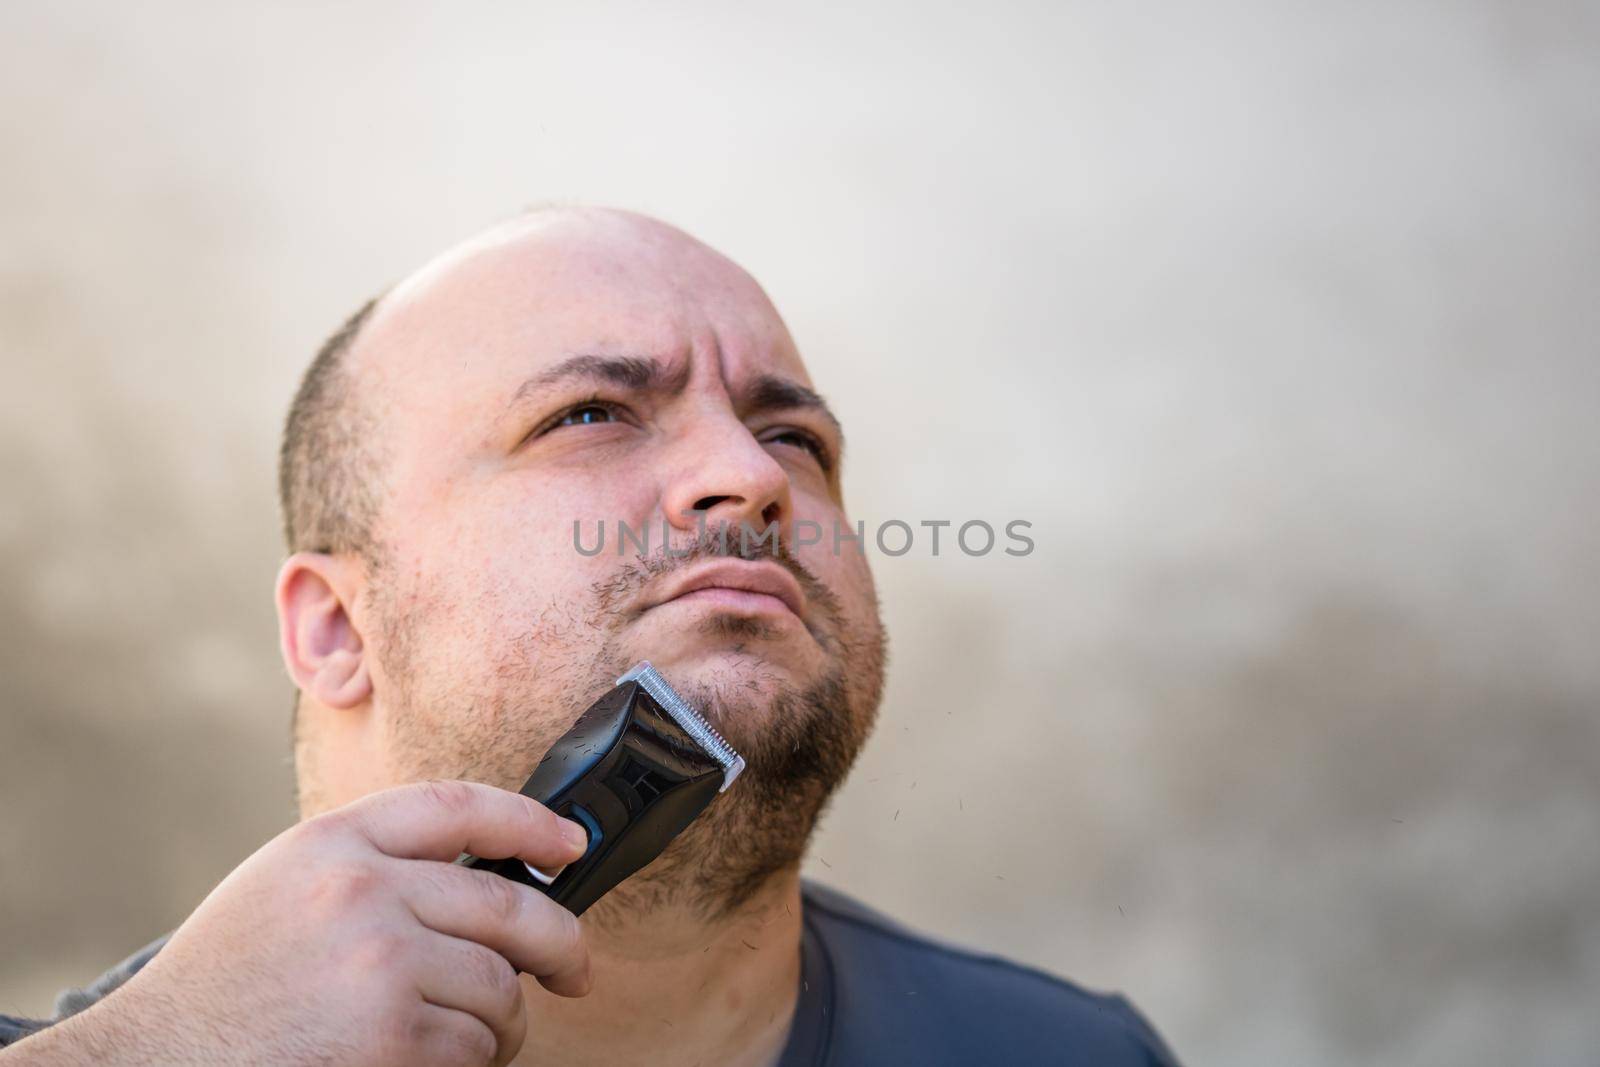 Male shaving or trimming his beard using a hair clipper or electric razor